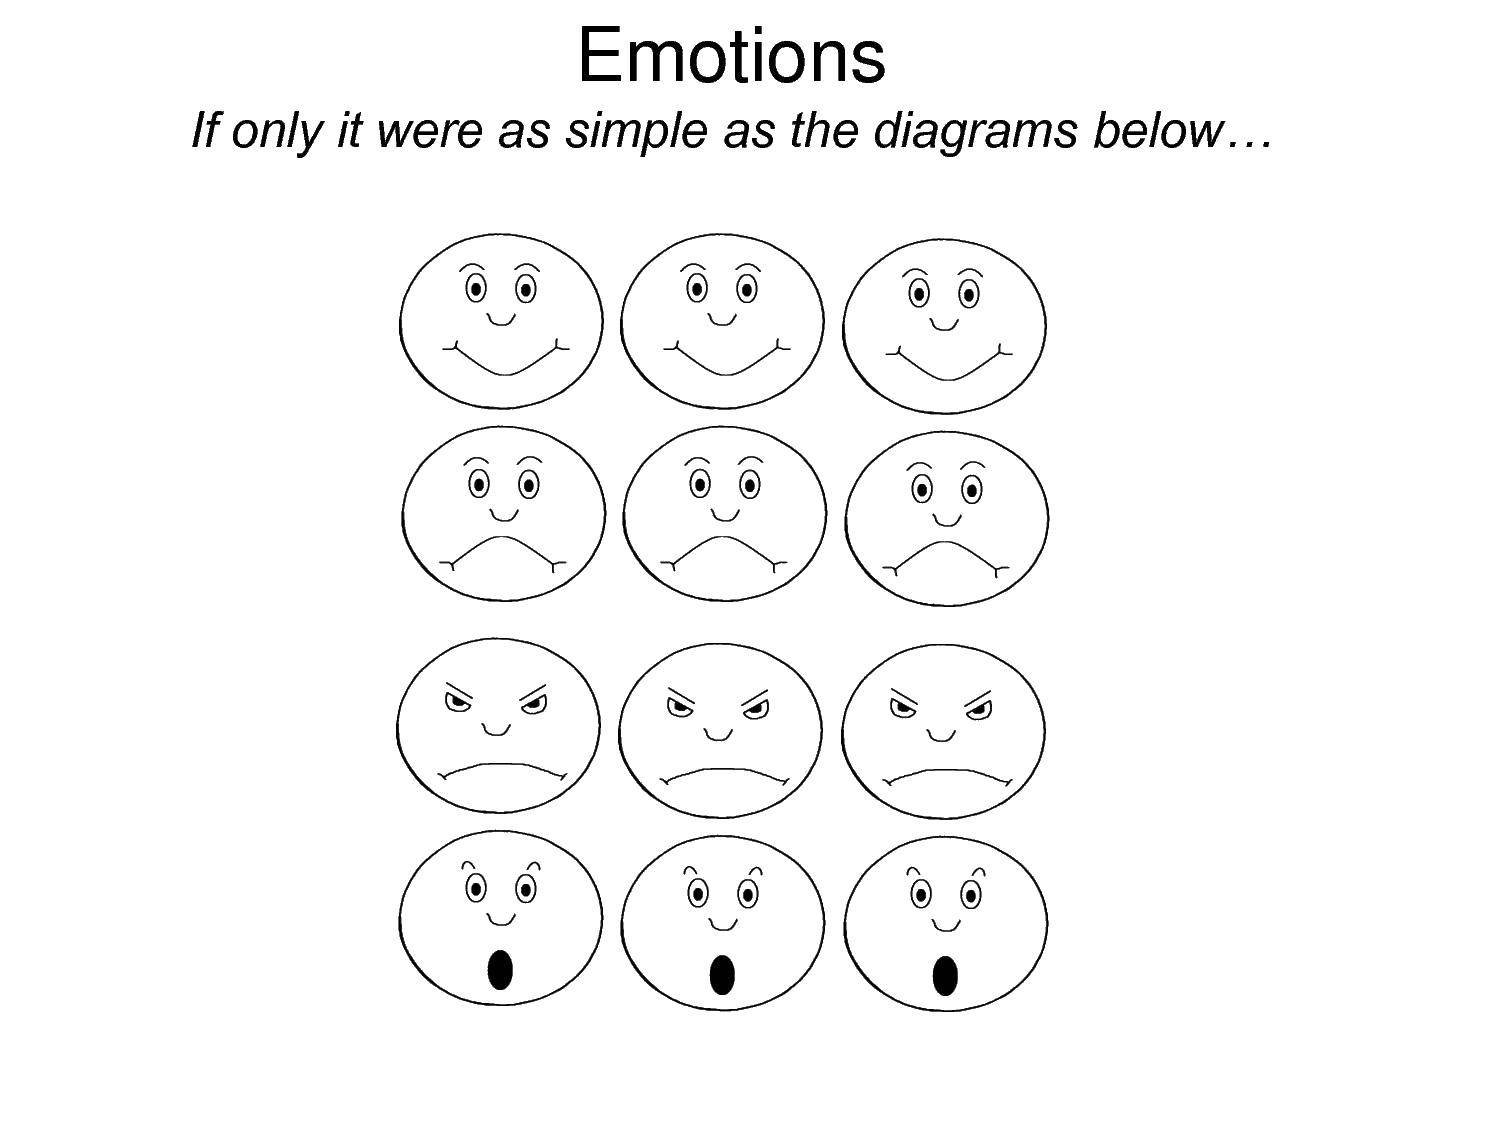 Coloring Emotions. Category The emotions. Tags:  emotions, emoticons.